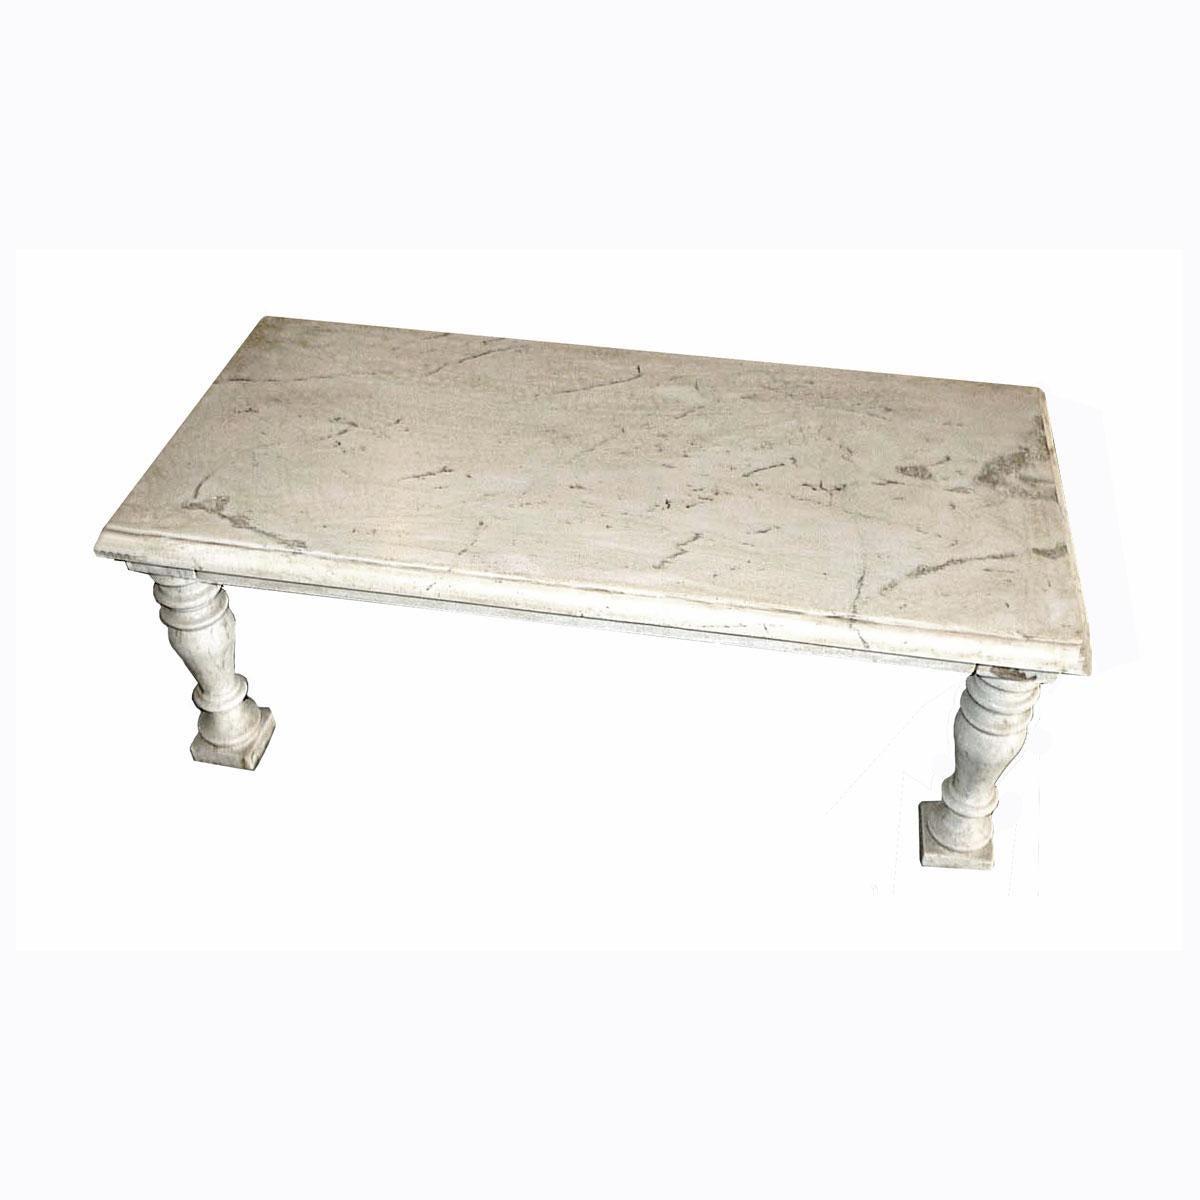 Indian Marble Bench/Coffee Table from India